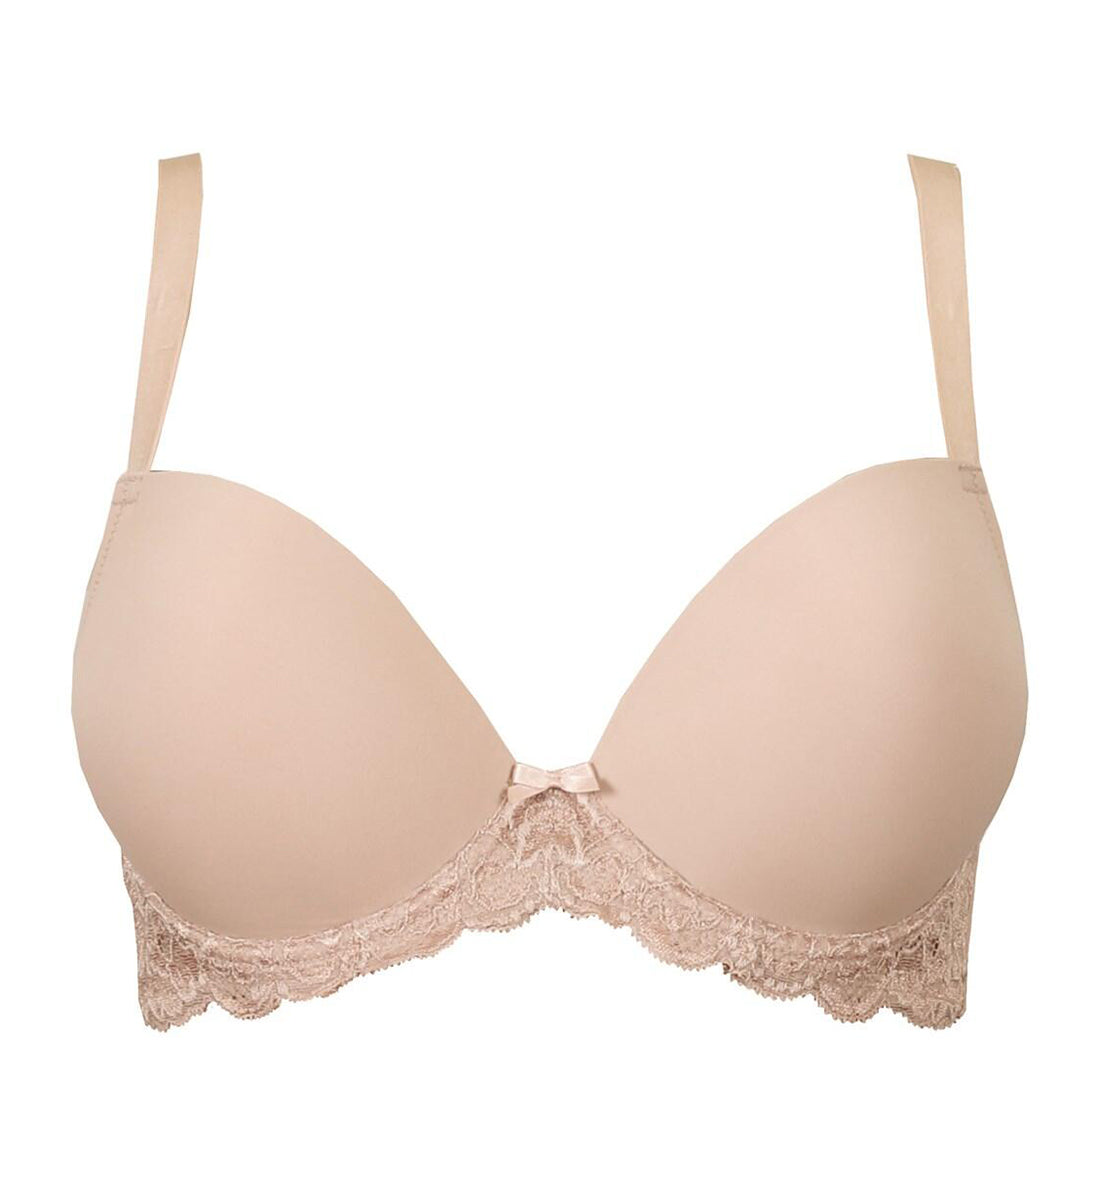 Pour Moi Forever Fiore Plunge Push Up Underwire T-shirt Bra (183309),30C,Almond - Almond,30C